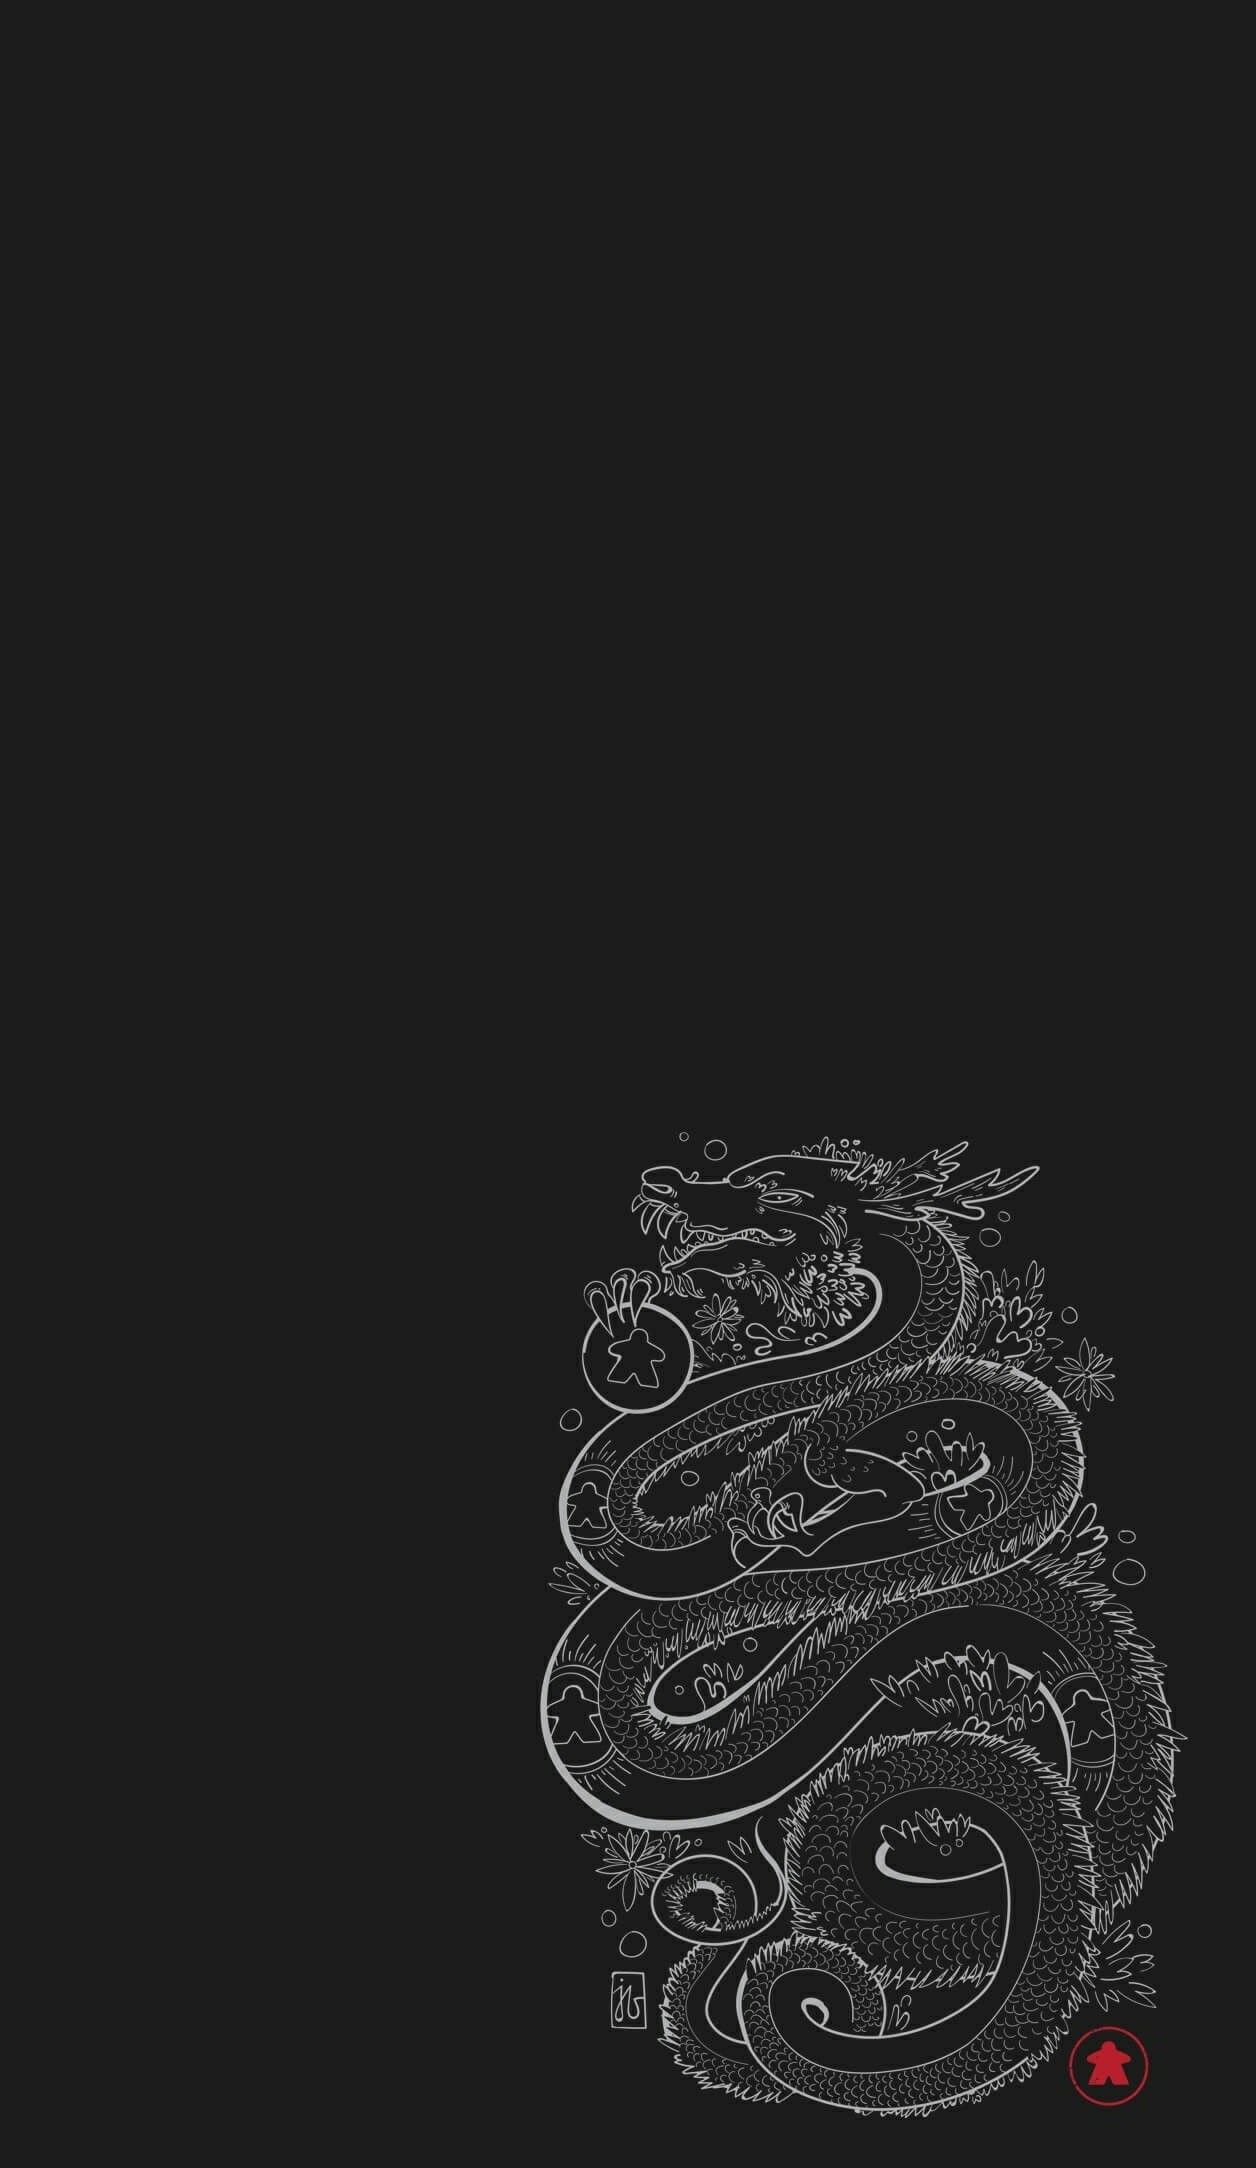 Pin by Raquel on WALLPAPERS Dragon wallpaper iphone Hypebeast